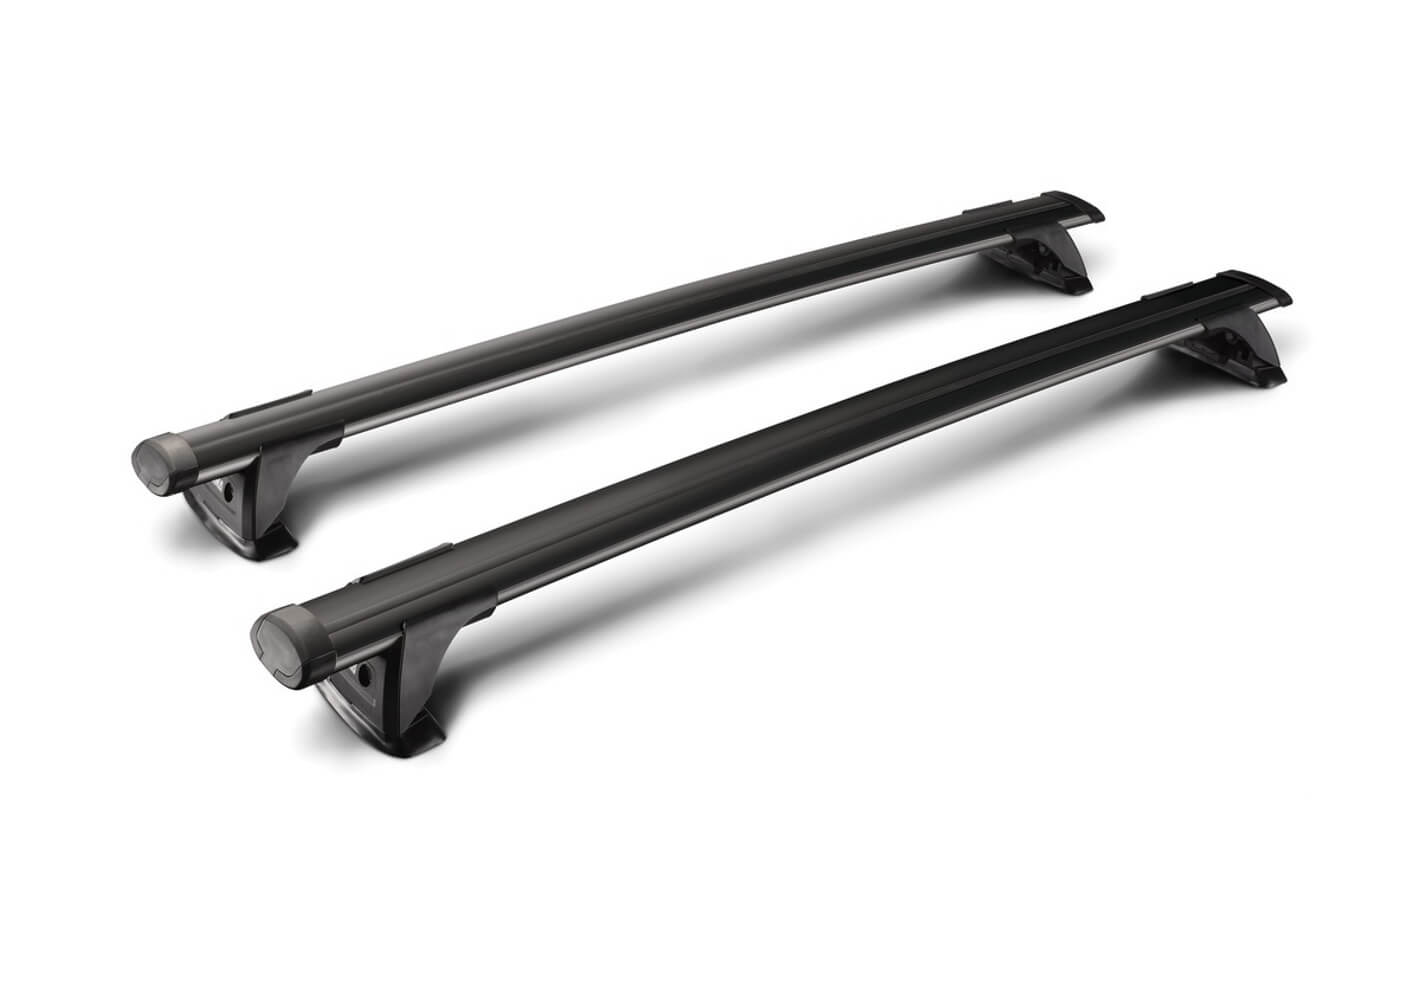 BMW 5 series four door saloon (1996 to 2001):Yakima roof bars package - S16B black bars with K371 kit